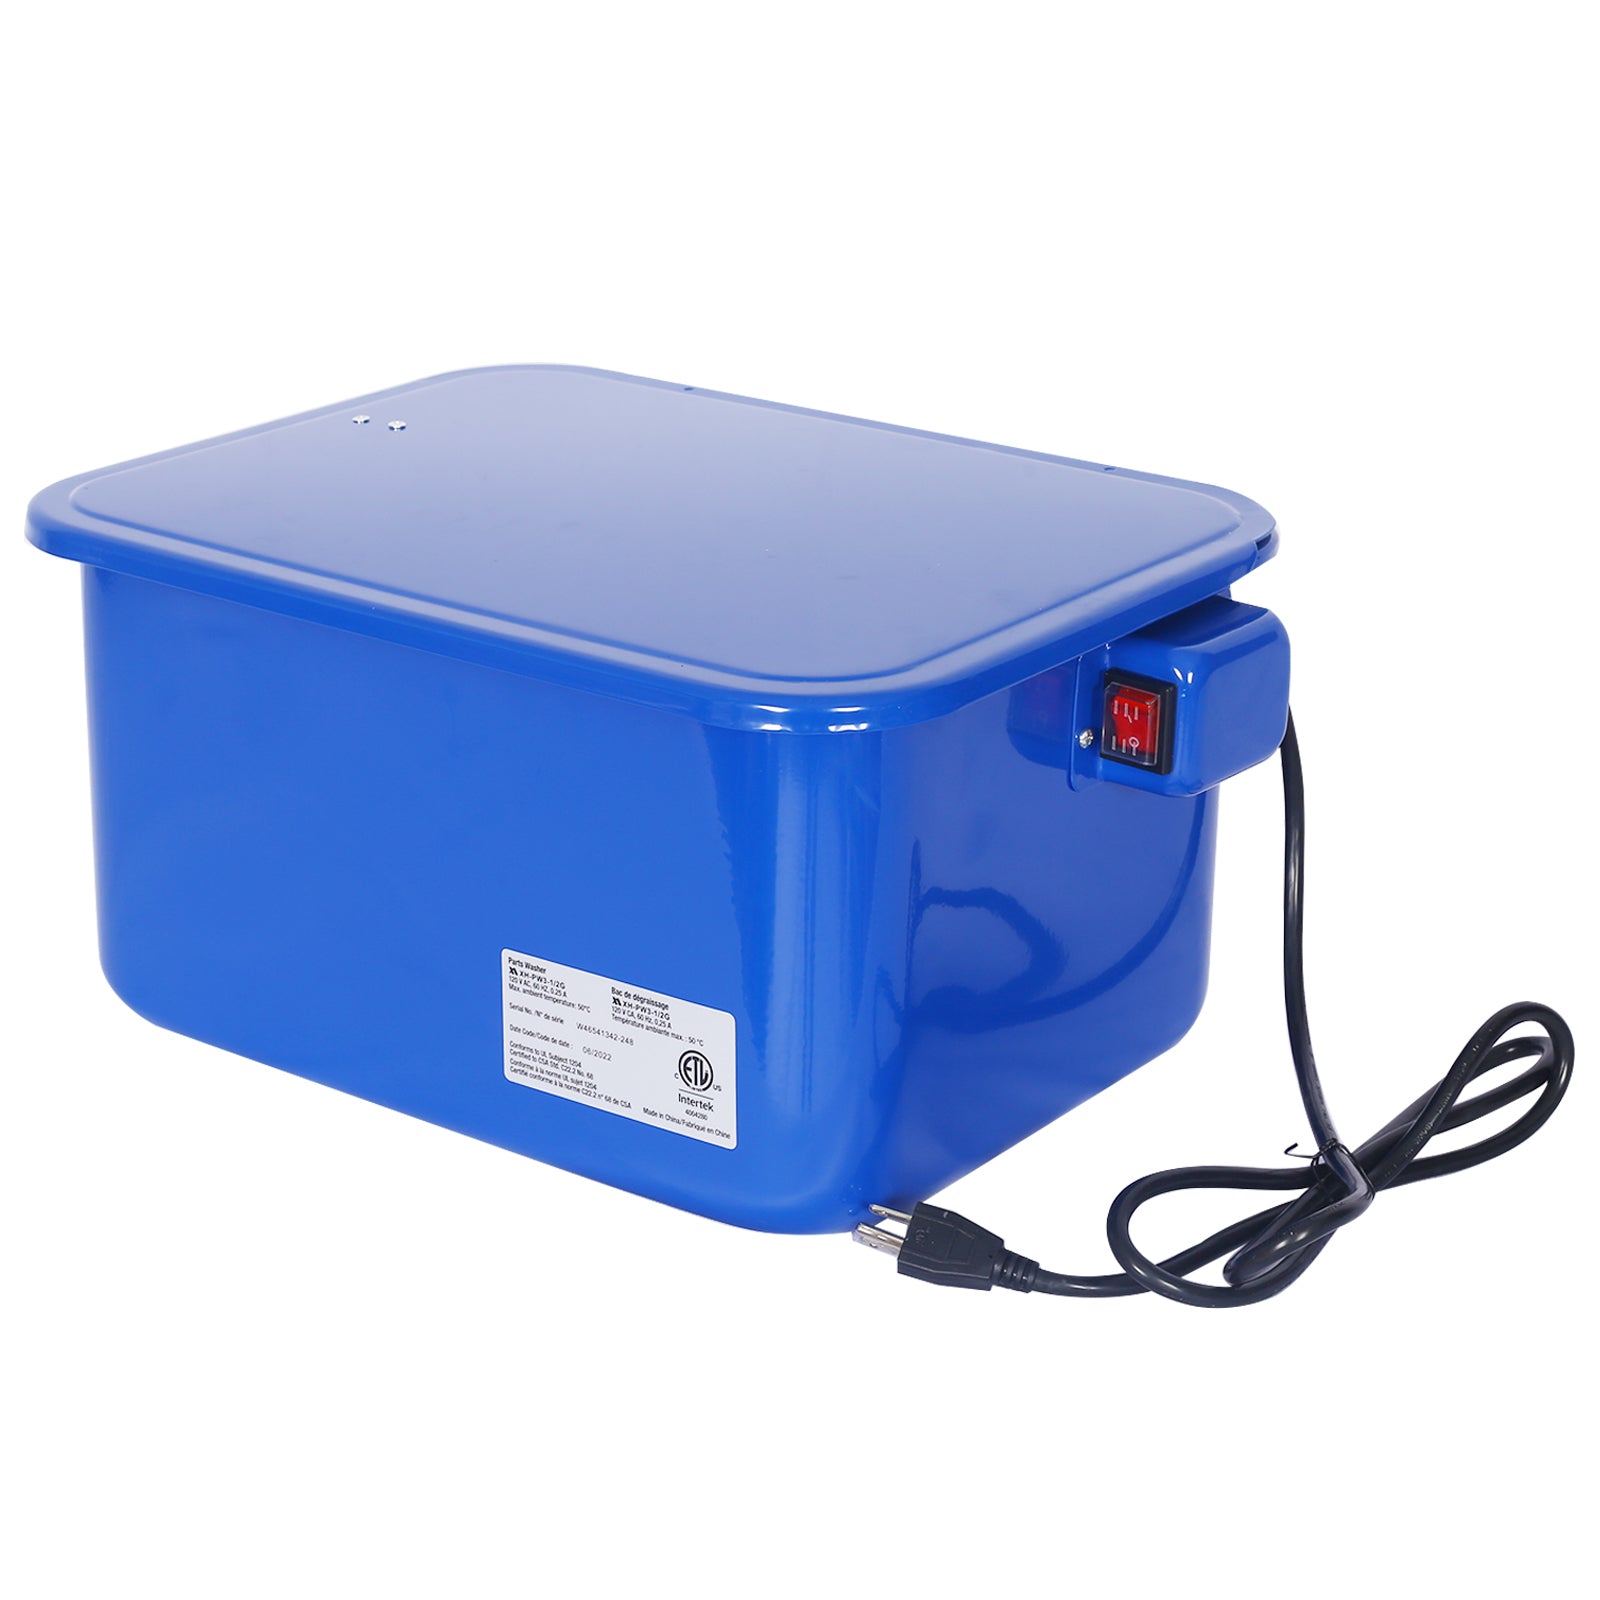 Cabinet parts washer with 110v pump,3.5 gallon BENCHTOP PARTS WASHER ,AUTOMOTIVE PARTS WASHER ELECTRICAL PUMP - Tonkn